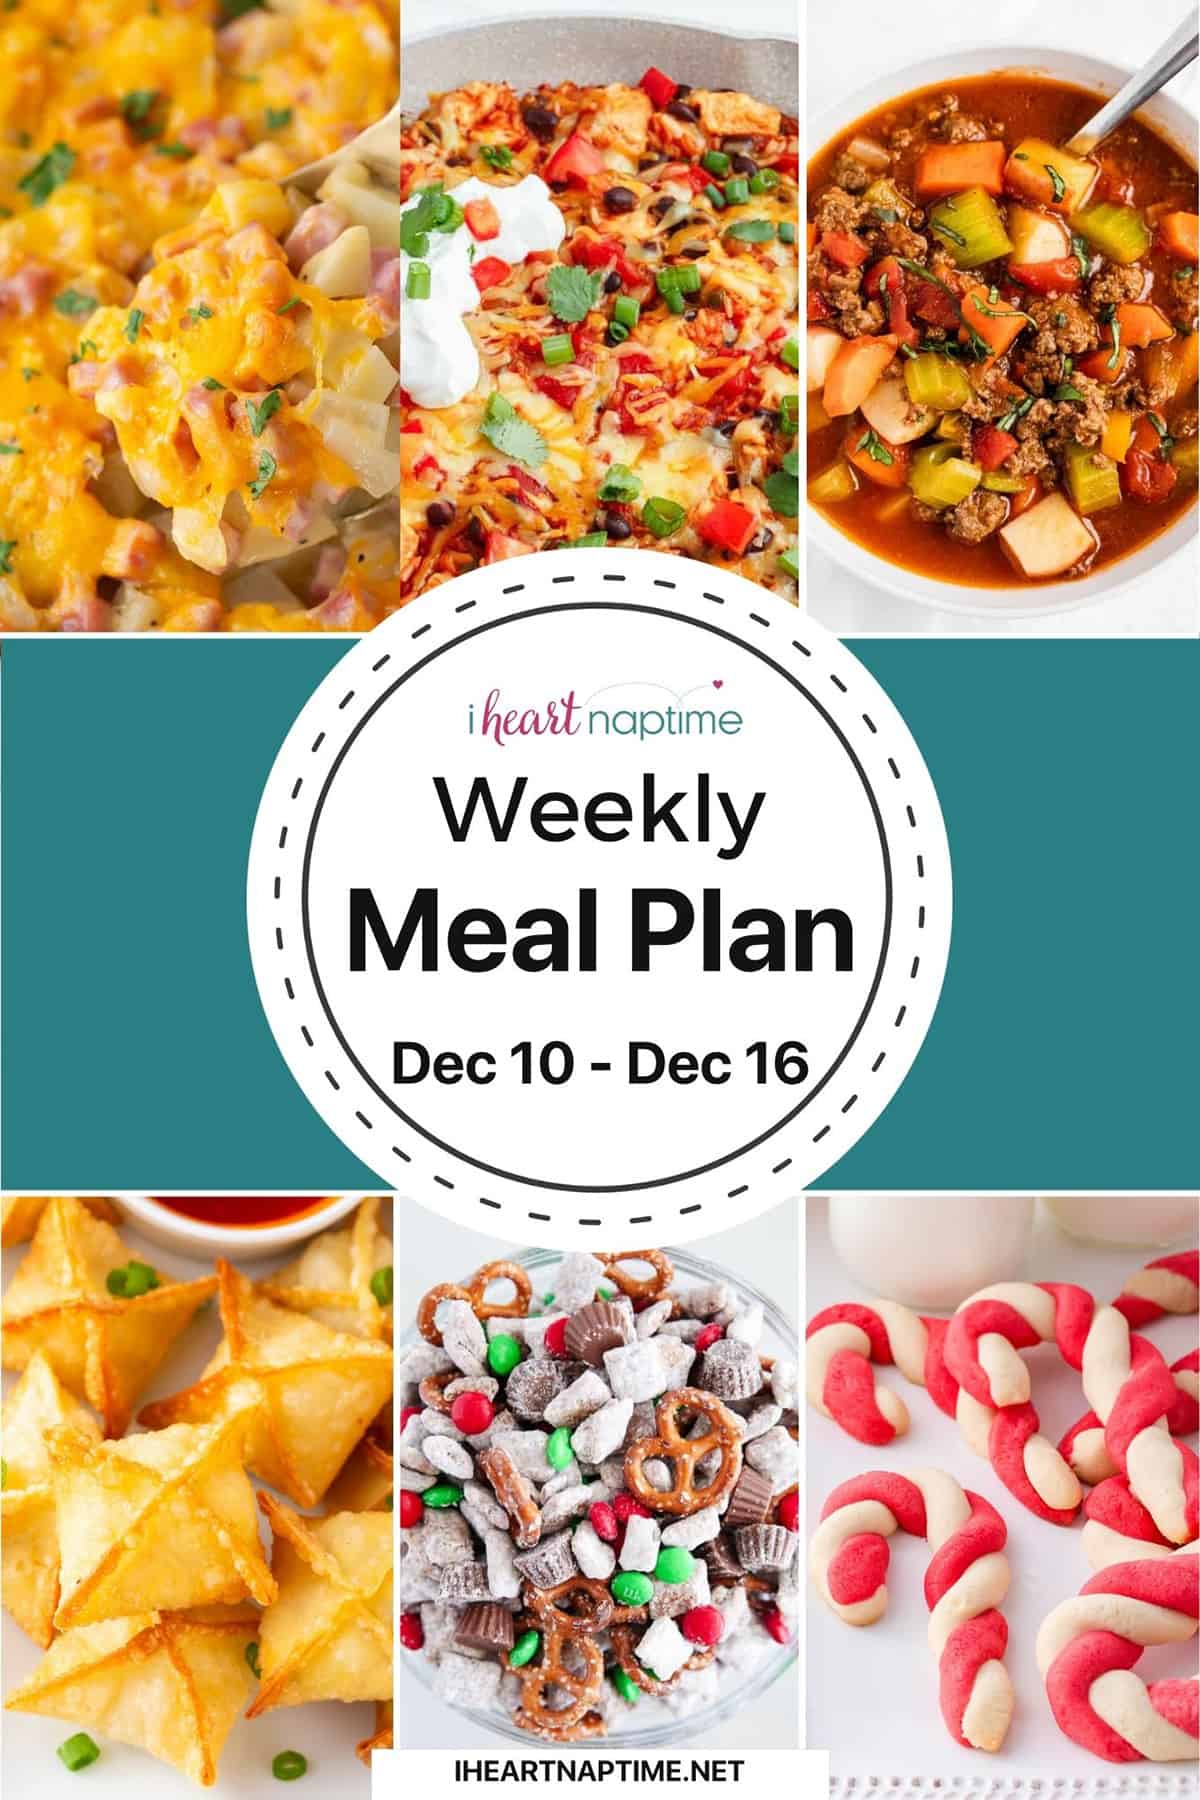 Weekly meal plan recipe photos for I Heart Naptime.